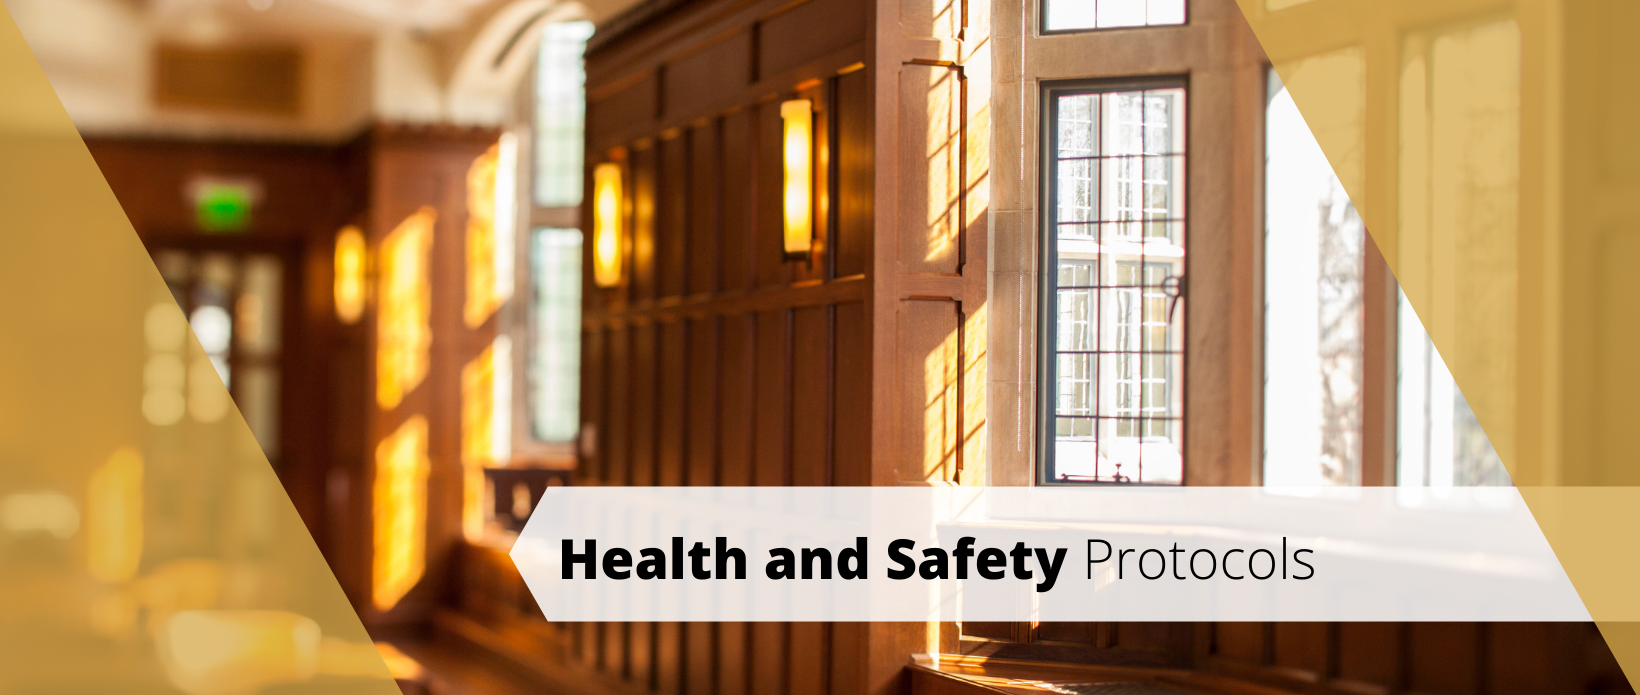 Learn more about the Vanderbilt's Health and Safety Protocols